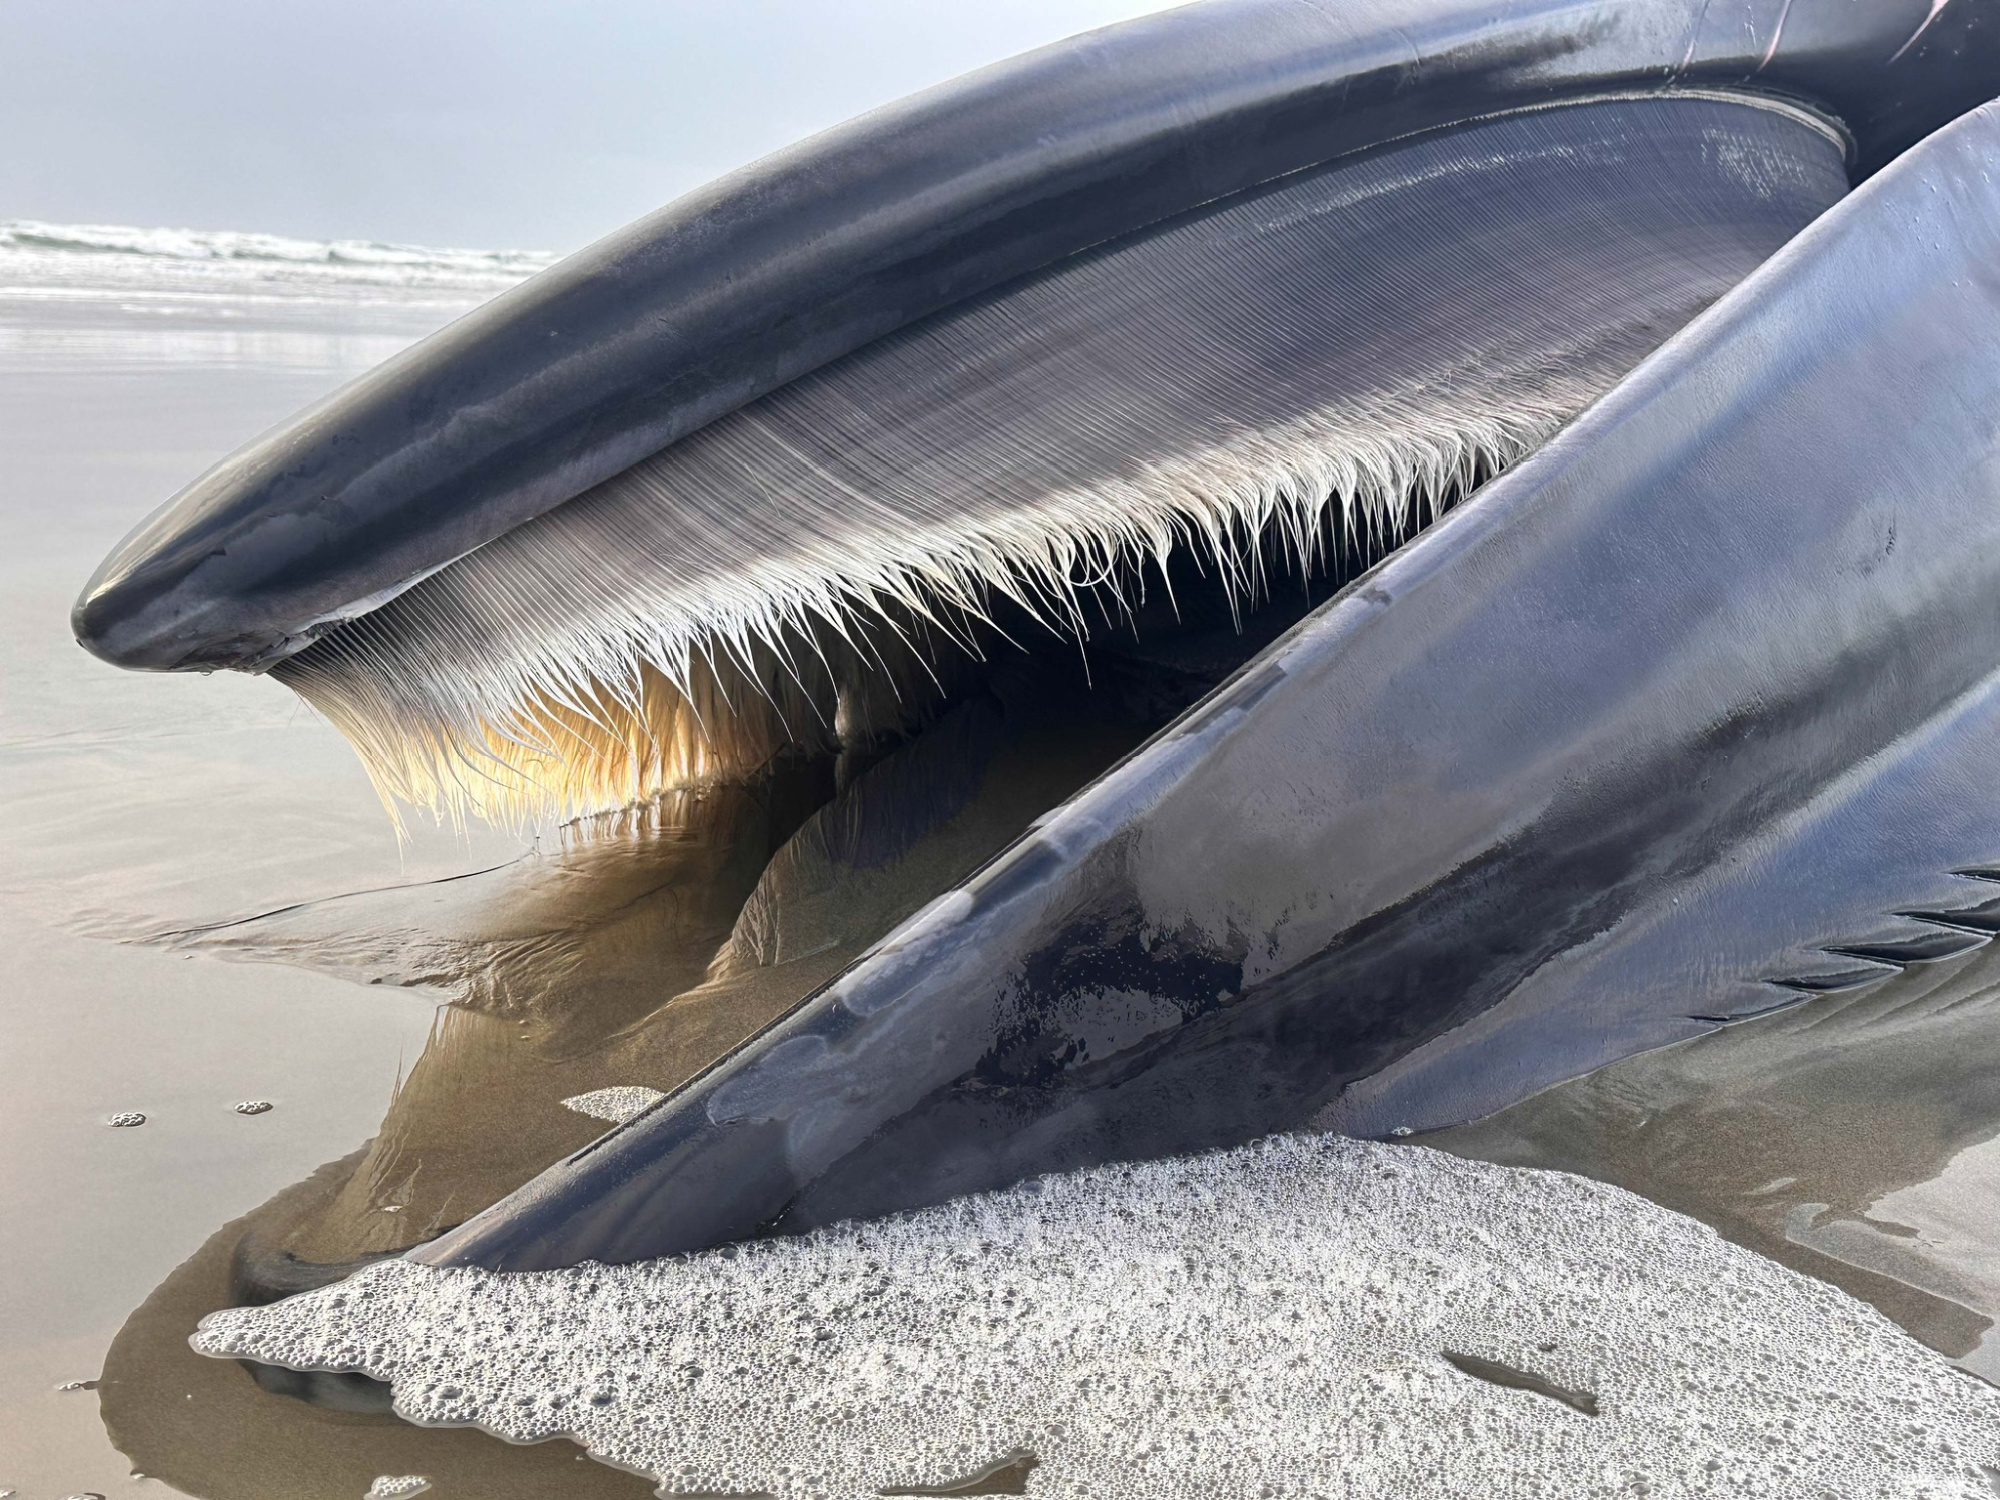 A dead Fin whale washed up on an Oregon beach.